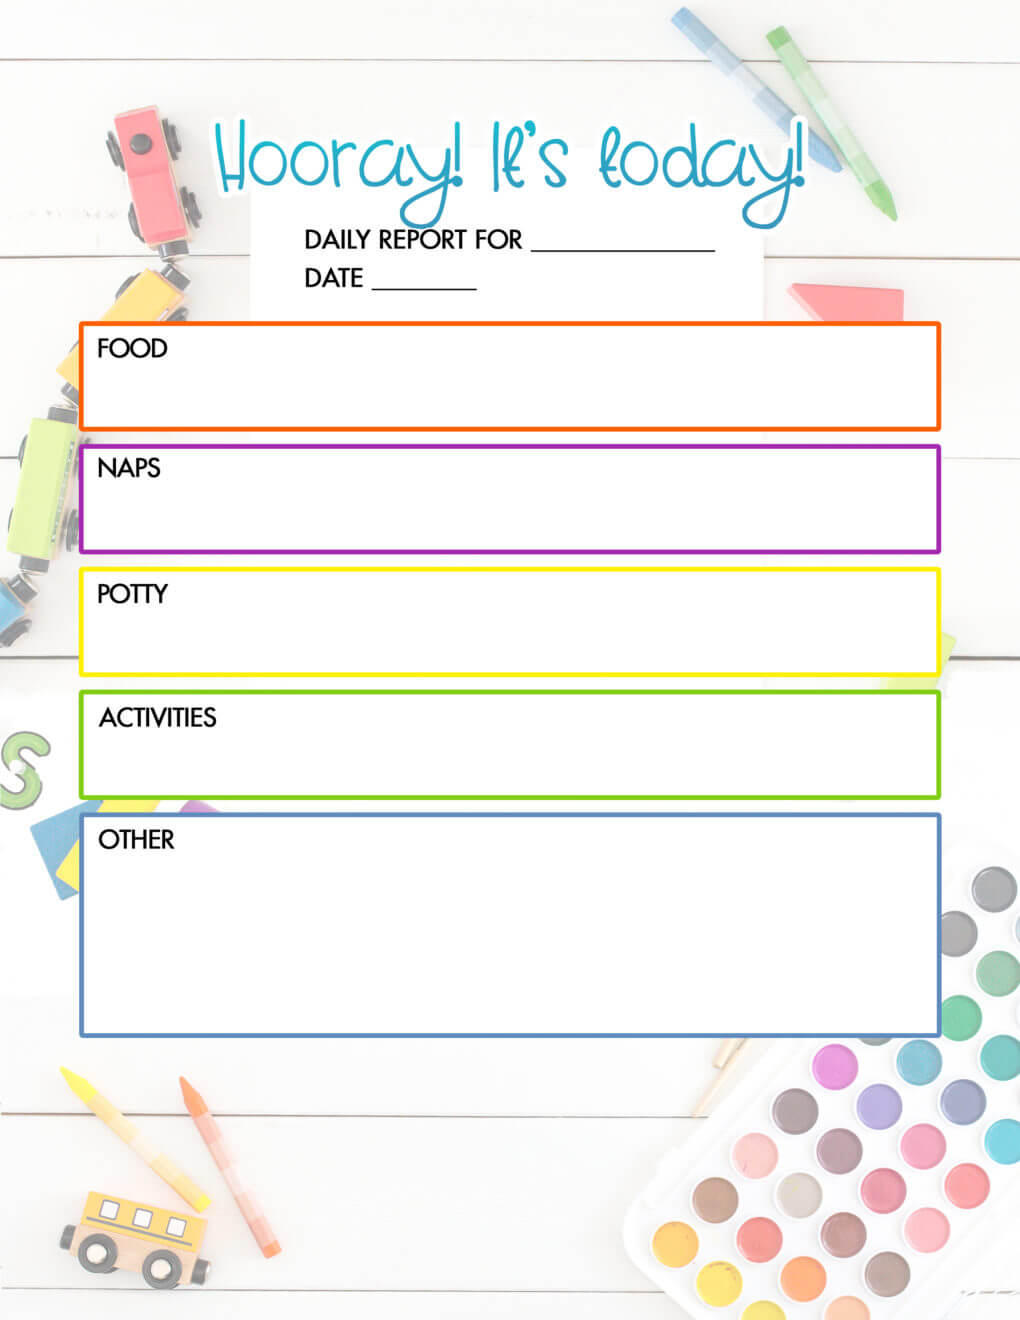 Free Daycare Daily Report | Child Care Printable – The Diy Pertaining To Daycare Infant Daily Report Template